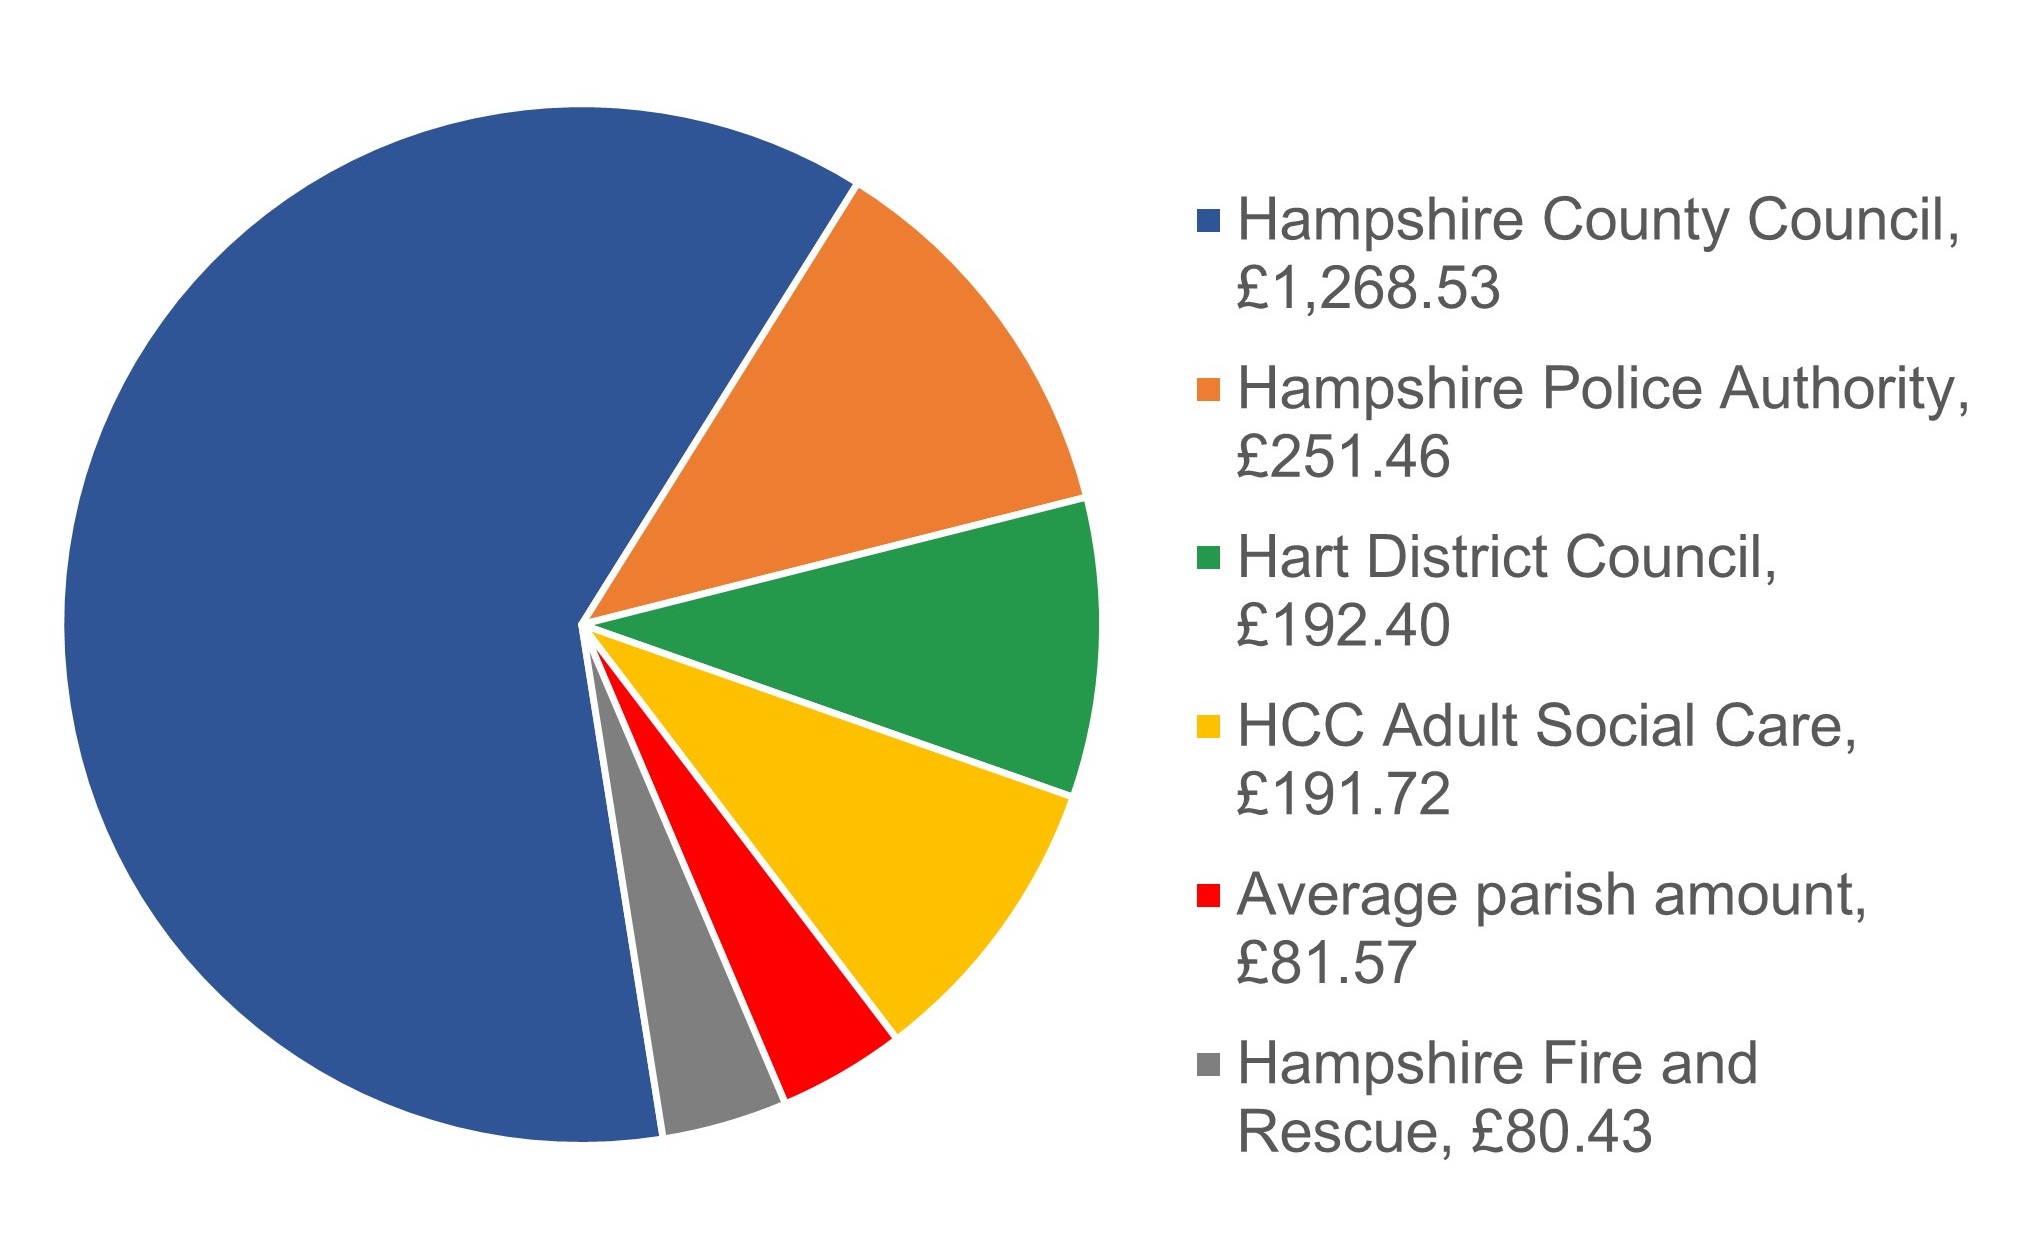 A pie chart showing how the Council Tax is broken down